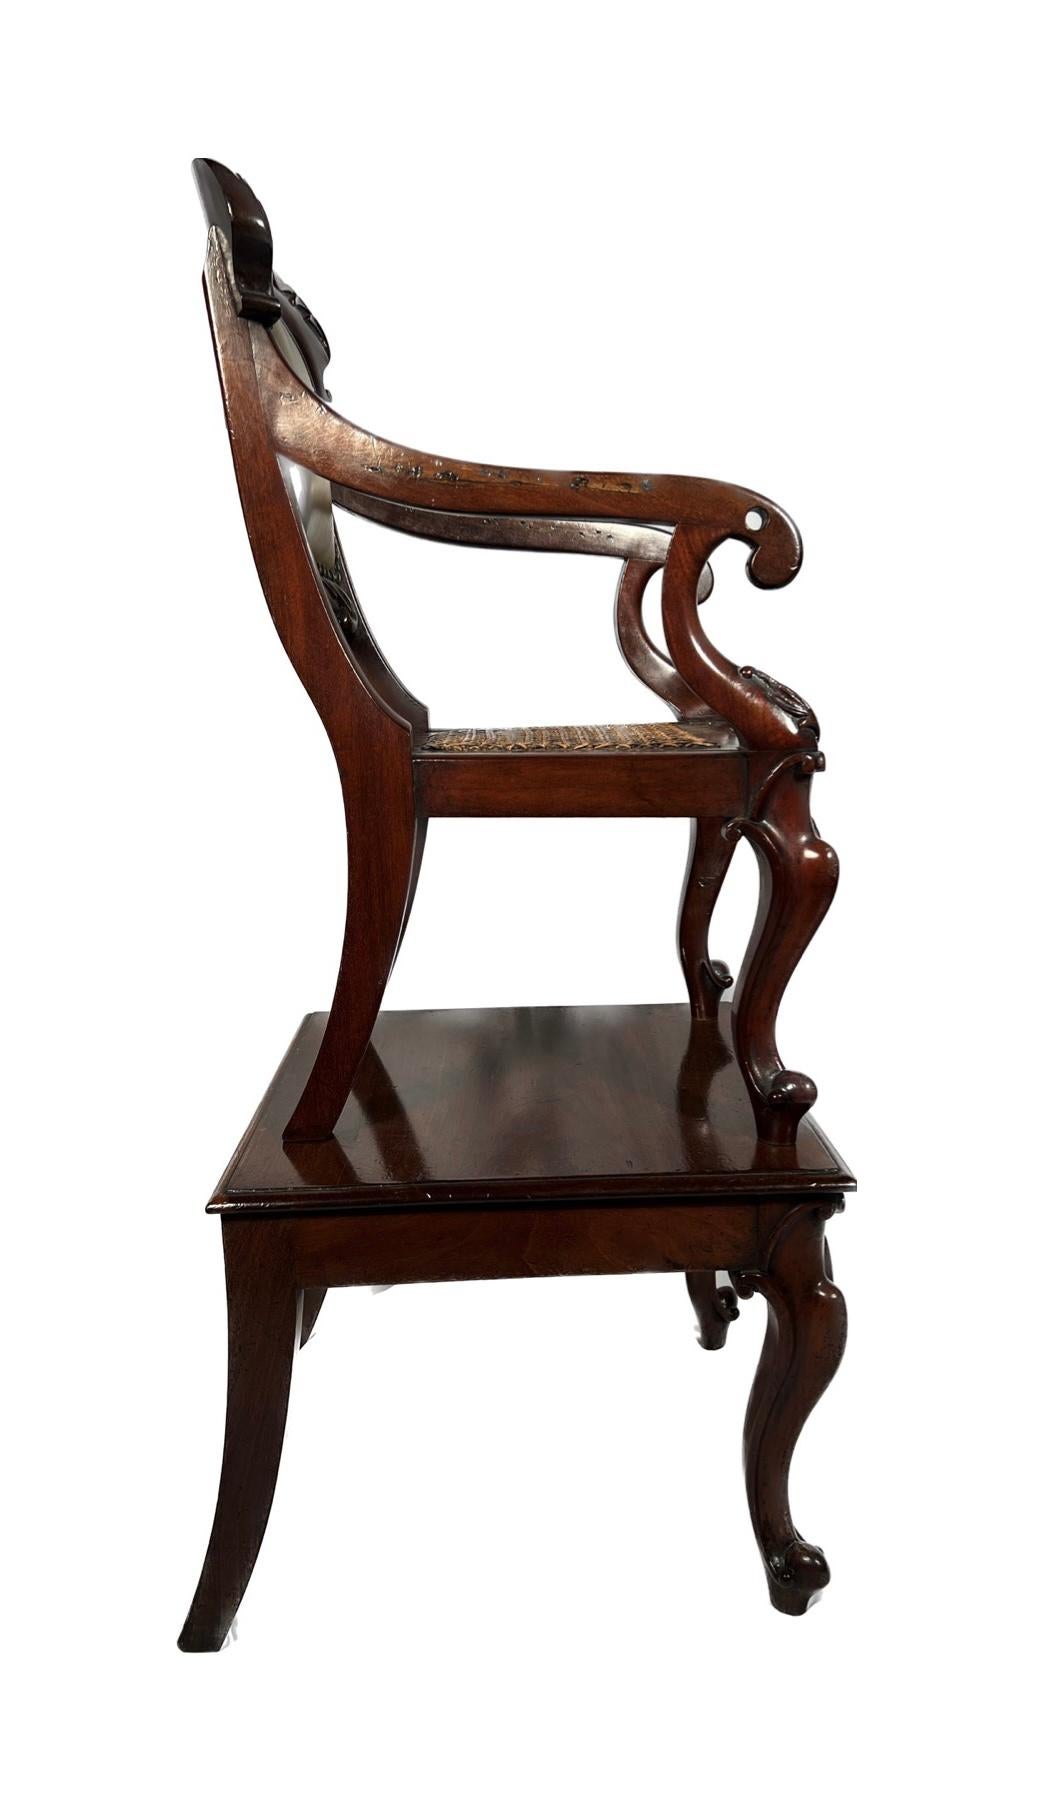 Antique English Victorian Child's Chair circa 1860 In Good Condition For Sale In New Orleans, LA